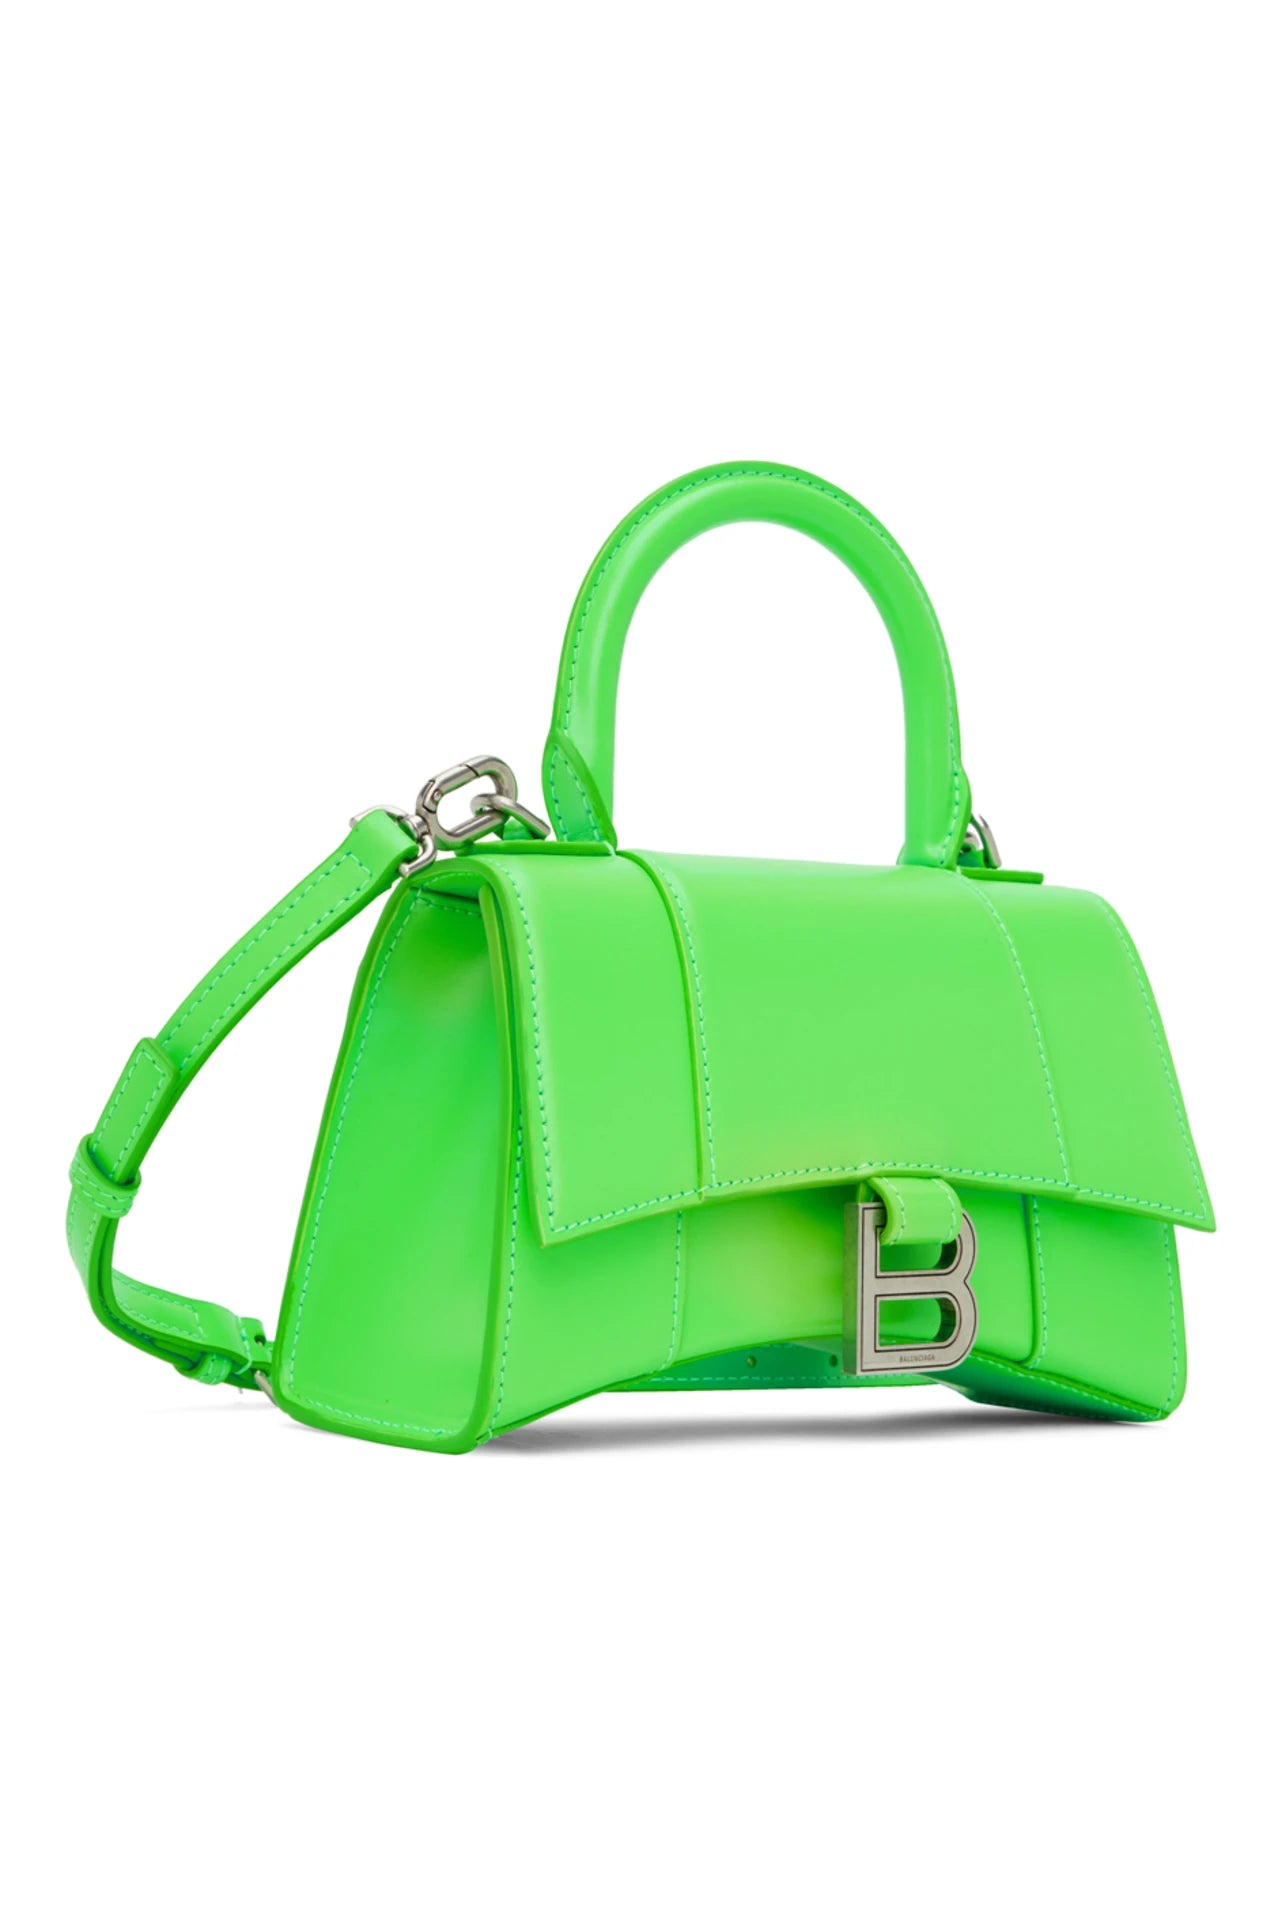 Hourglass Top Handle Bag XS in Green Leather